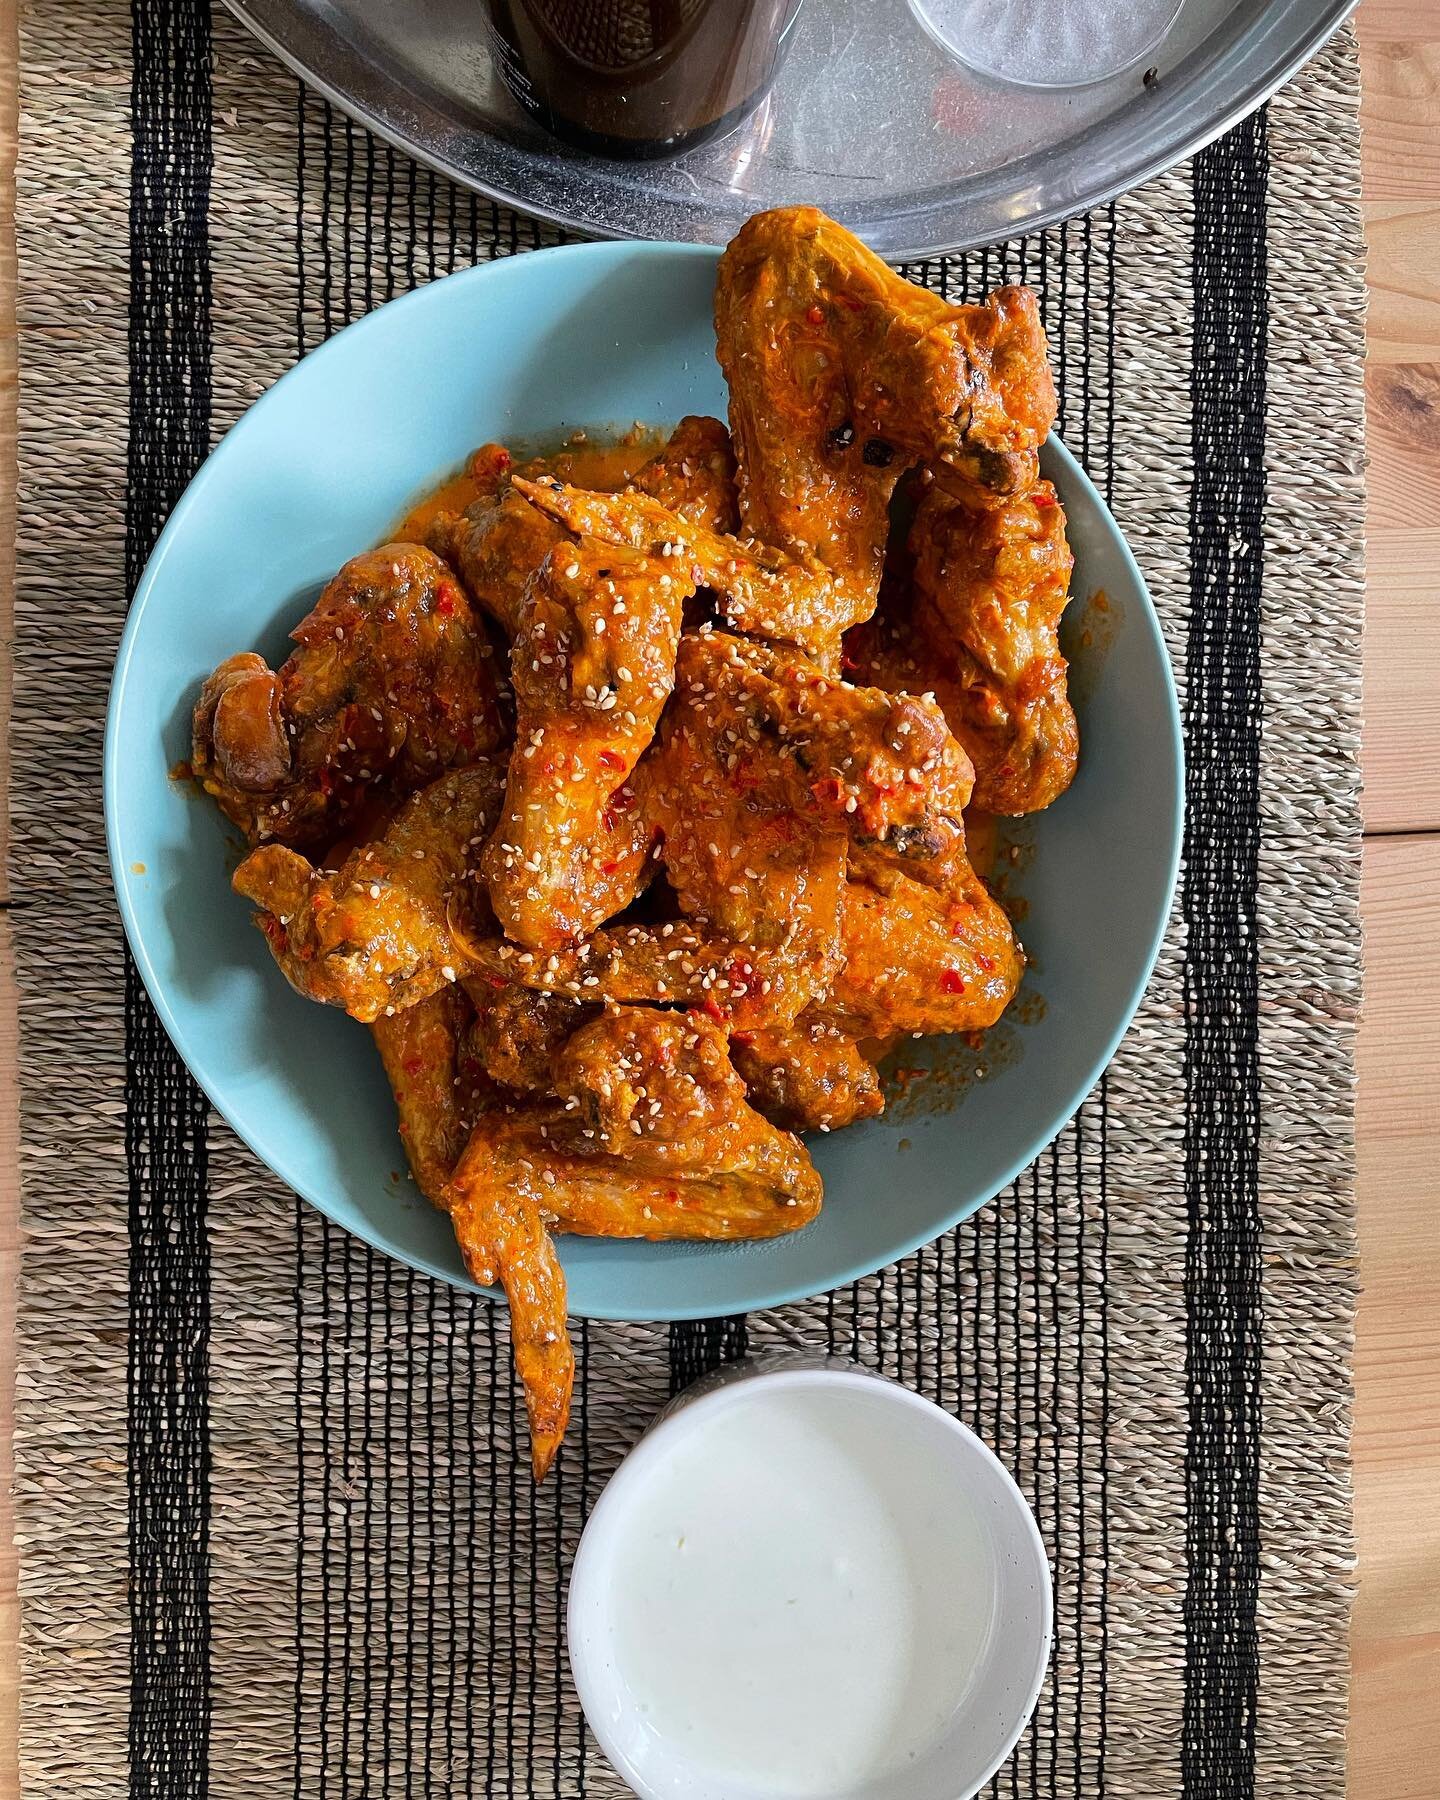 Hot sauce and wings is about as iconic as a food pairing gets, (or cauliflower wings if you&rsquo;re so inclined).

Mixing 50:50 Onsen Hot Sauce with melted butter makes a killer buffalo sauce. Sprinkle with sesame seeds and serve alongside a zesty c